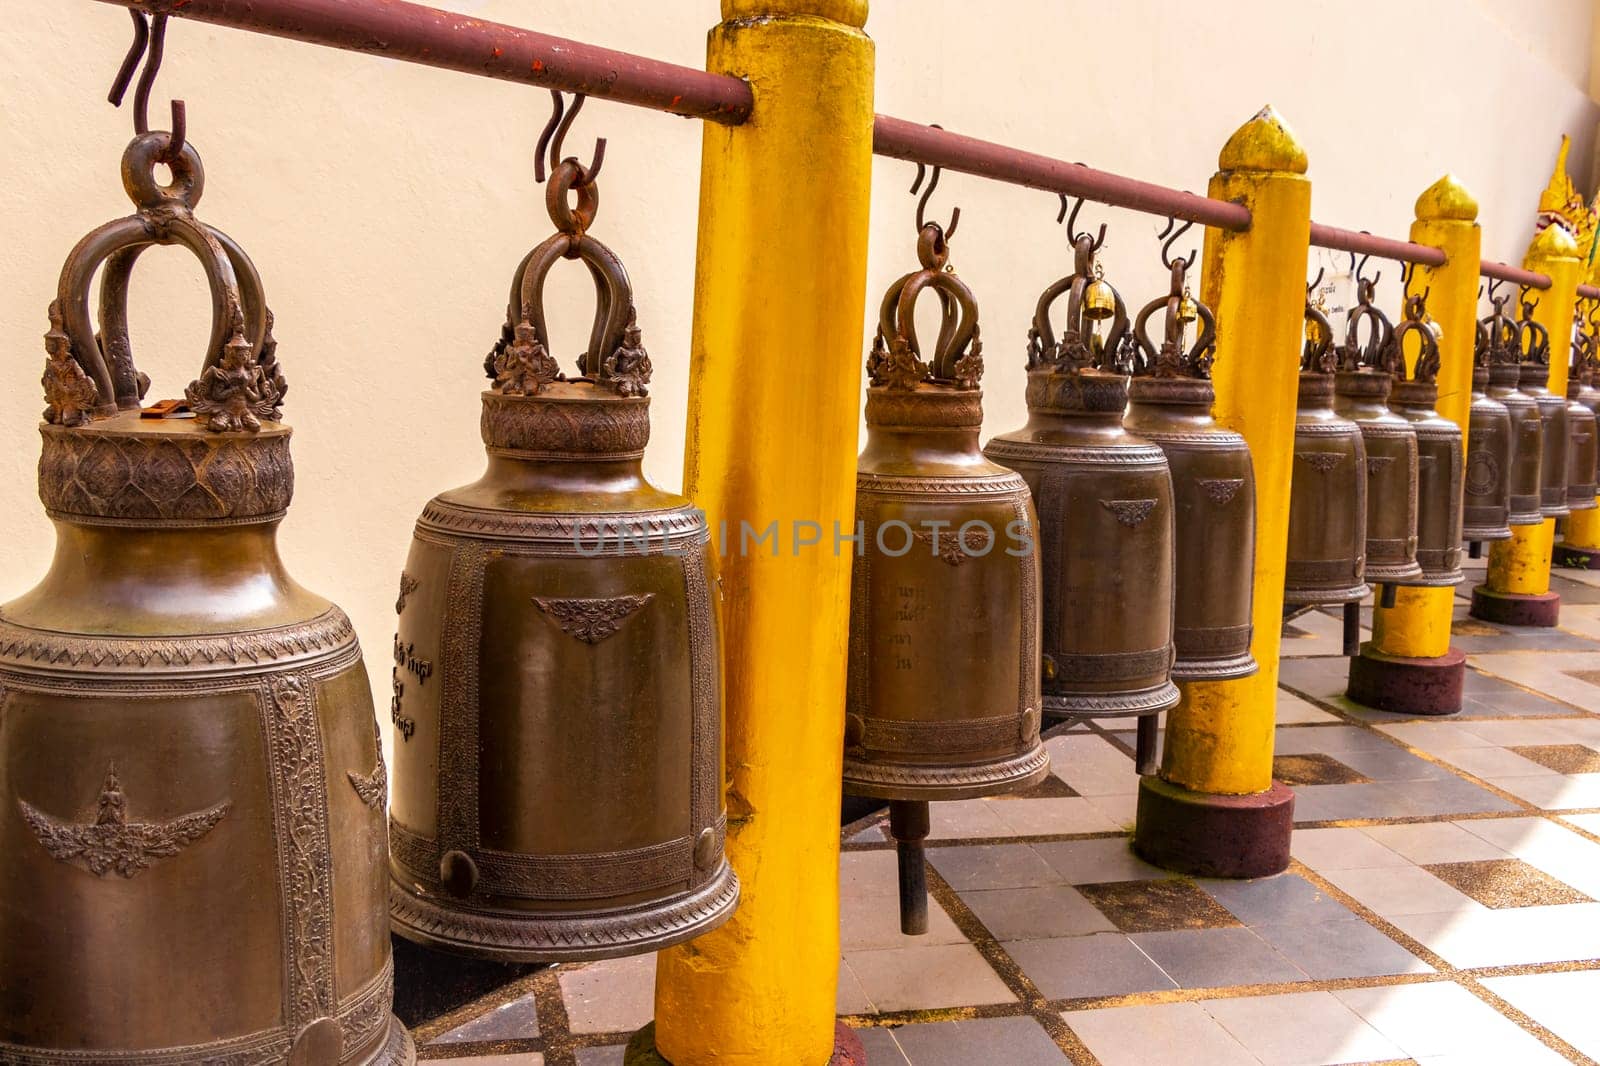 Gong and bell bells at golden gold Wat Phra That Doi Suthep temple temples building in Chiang Mai Amphoe Mueang Chiang Mai Thailand in Southeastasia Asia.